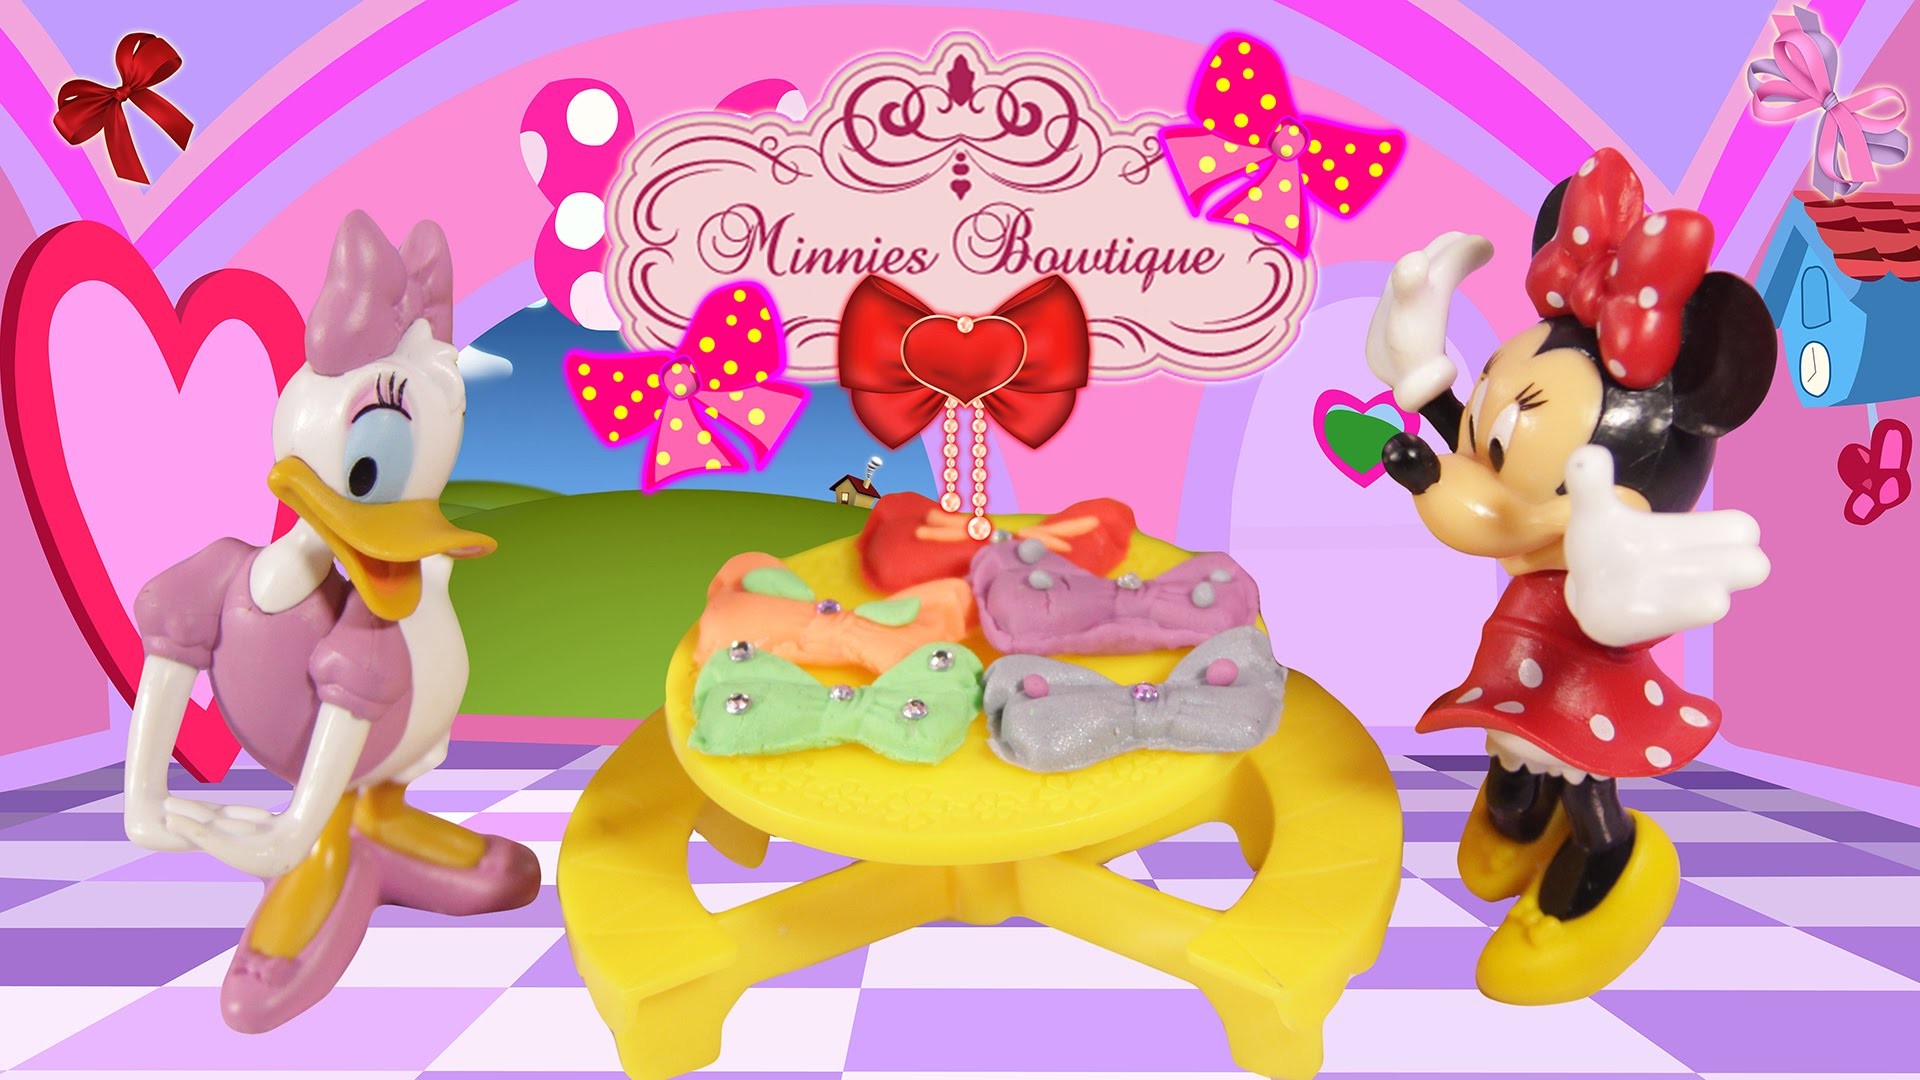 Mickey Mouse Live Wallpaper Wallpapersafari - Minnie Party Bowtique Background - HD Wallpaper 